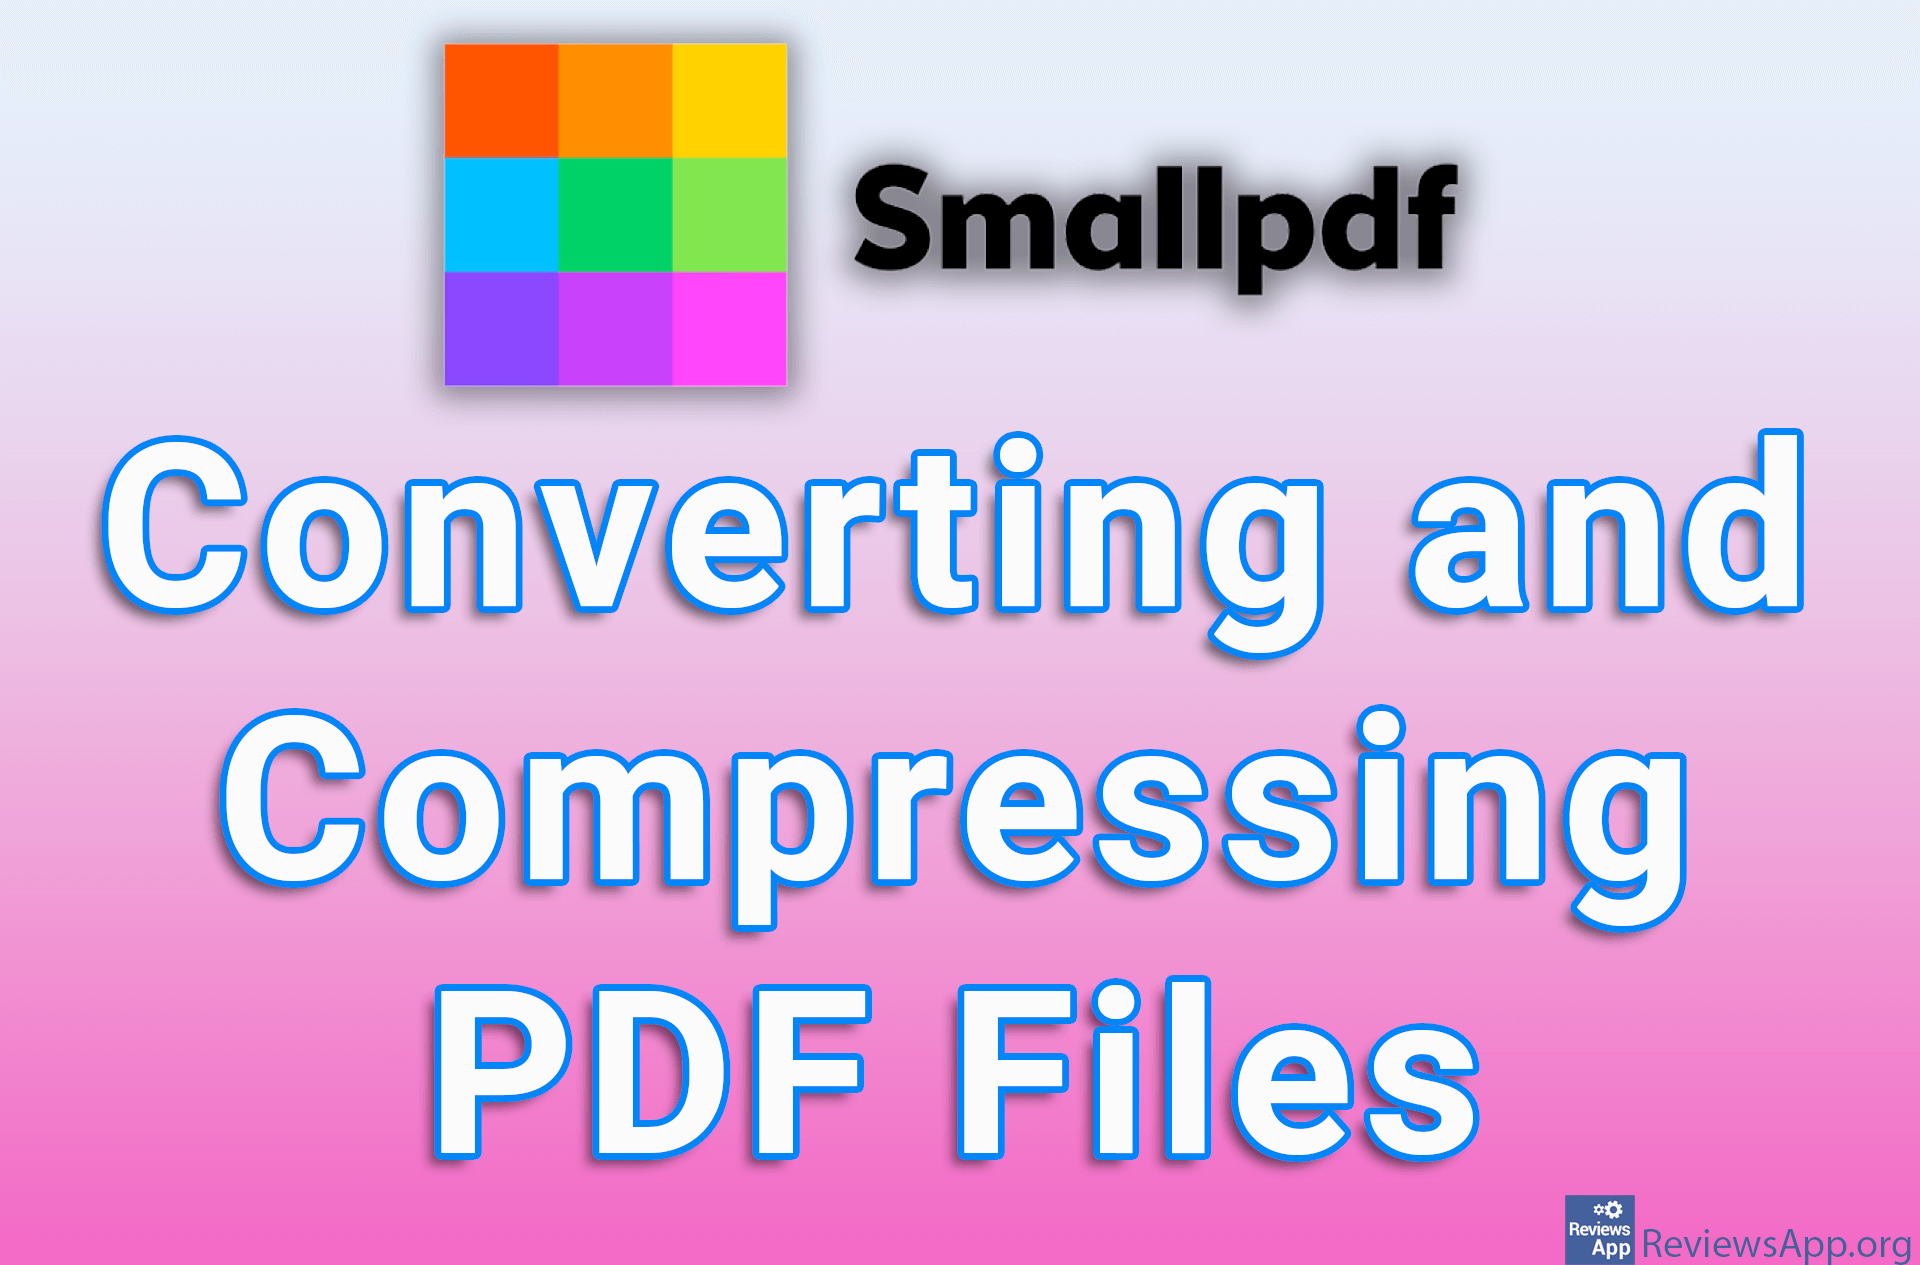 Smallpdf – Converting and Compressing PDF Files